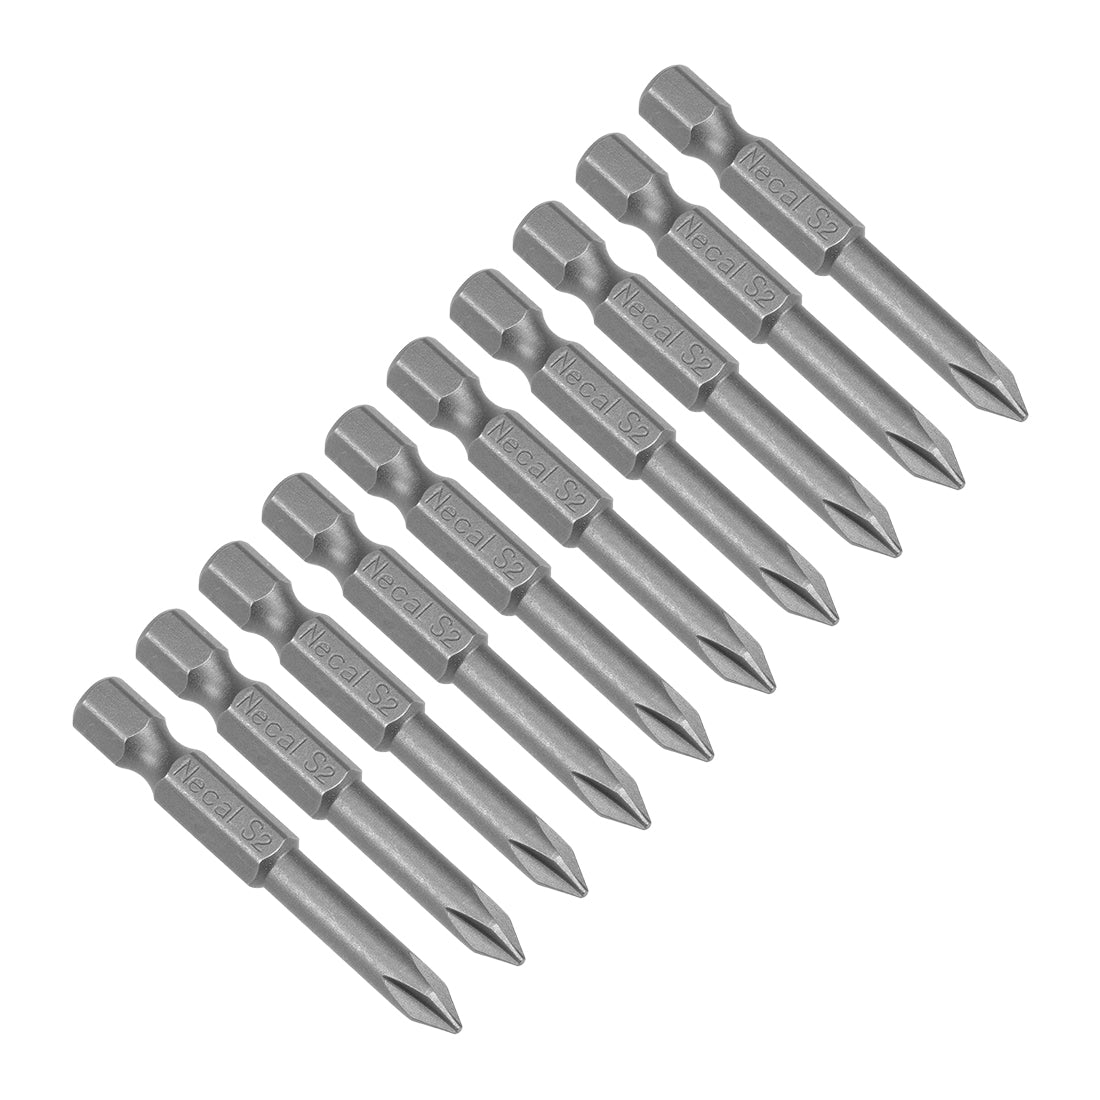 Uxcell Uxcell 10pcs 50mm 1/4" Hex Shank 4mm Magnetic Phillips Head Screwdriver Bits S2